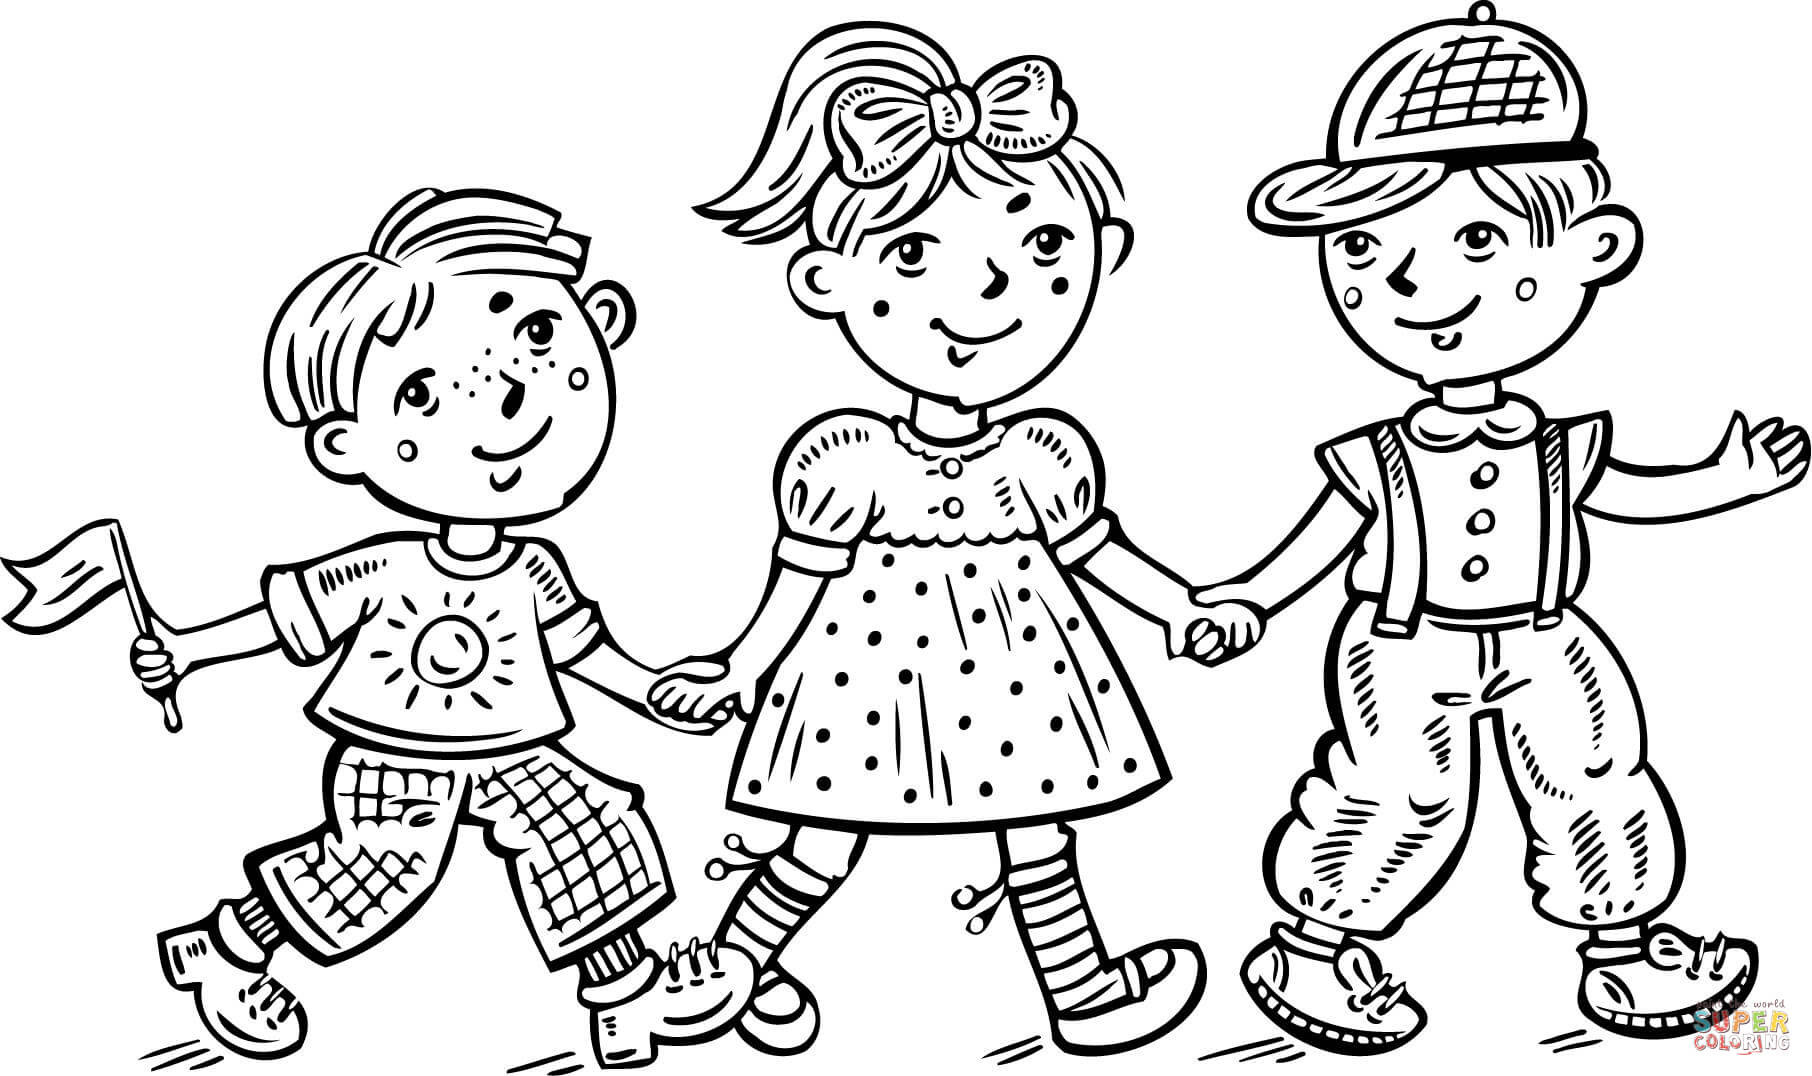 Coloring Pages Kidsboys.Com
 Child Line Drawing at GetDrawings